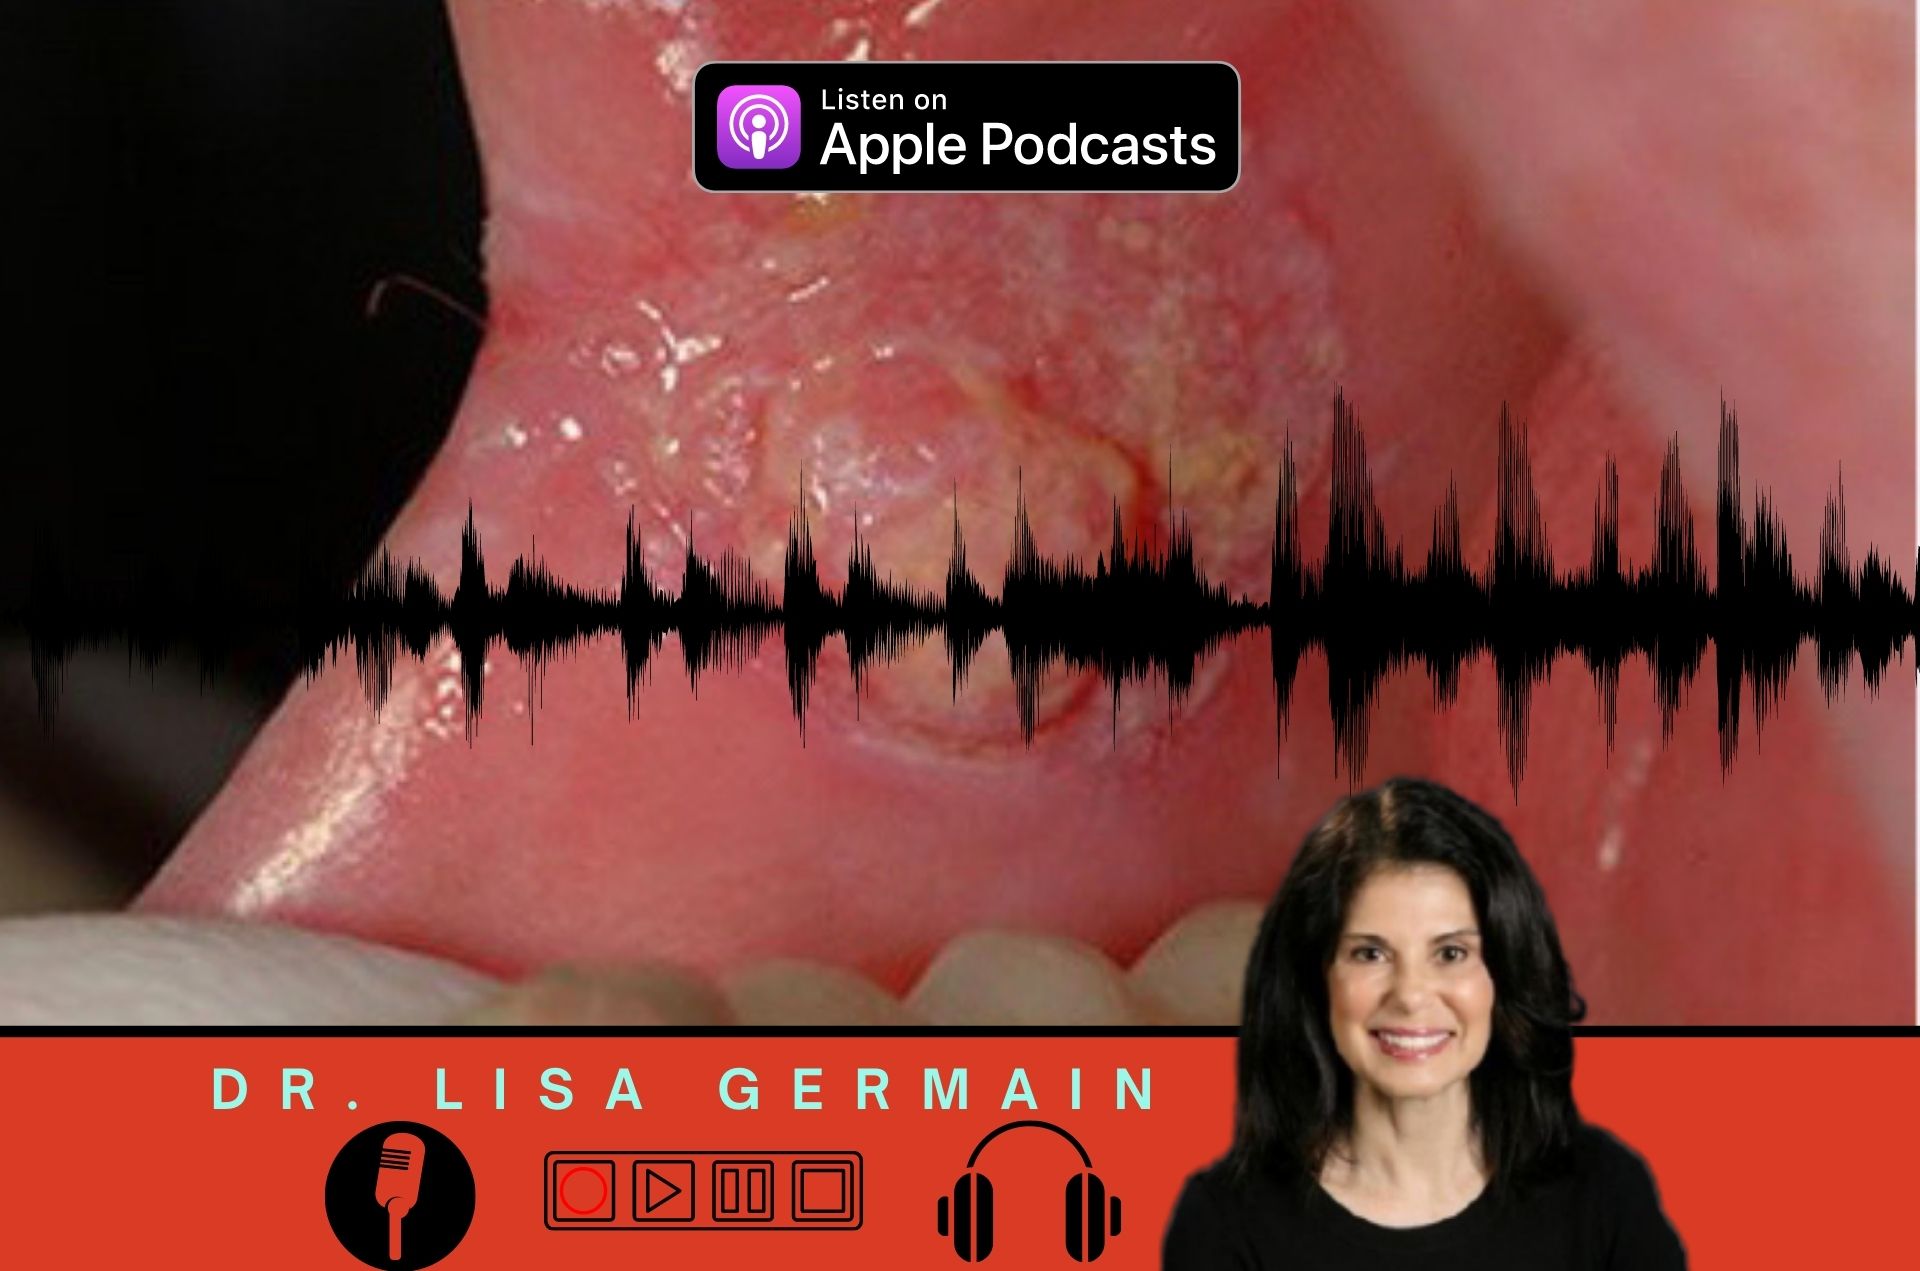 Oral Cancer Causes podcast by Dr. Lisa Germain